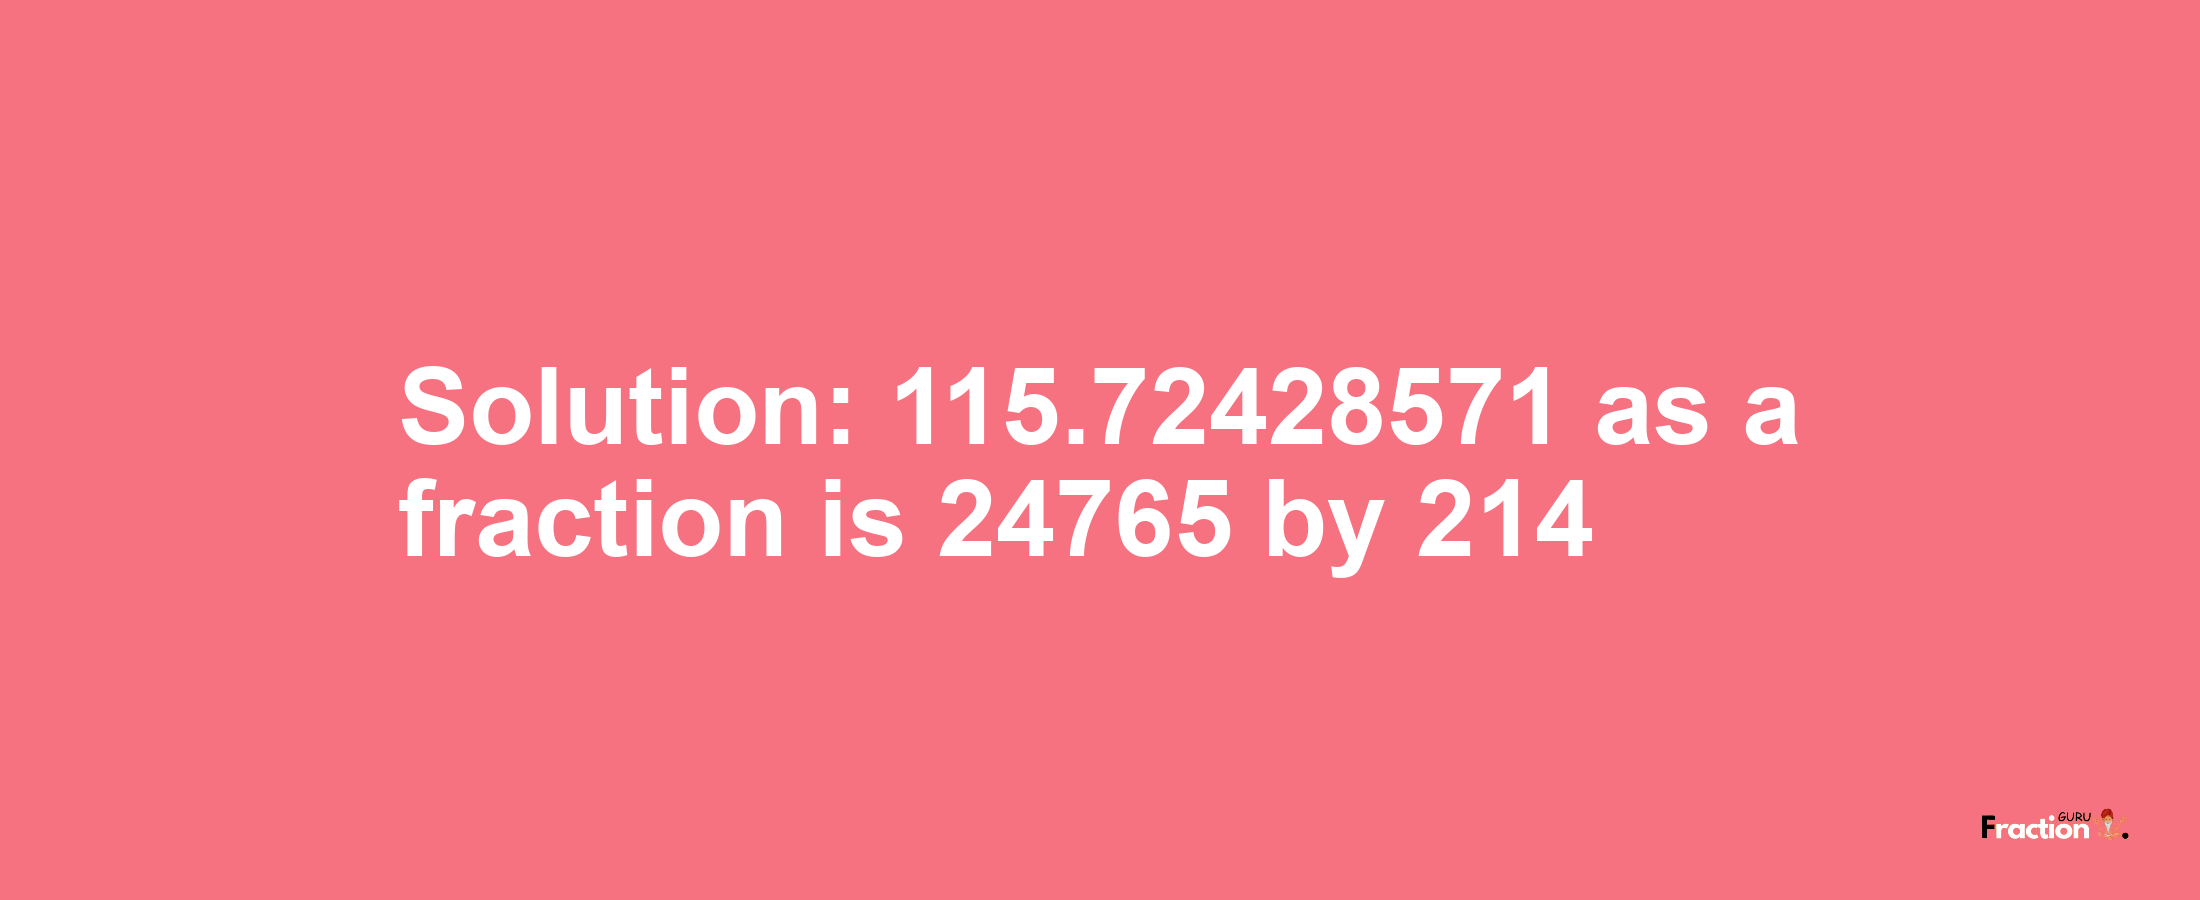 Solution:115.72428571 as a fraction is 24765/214